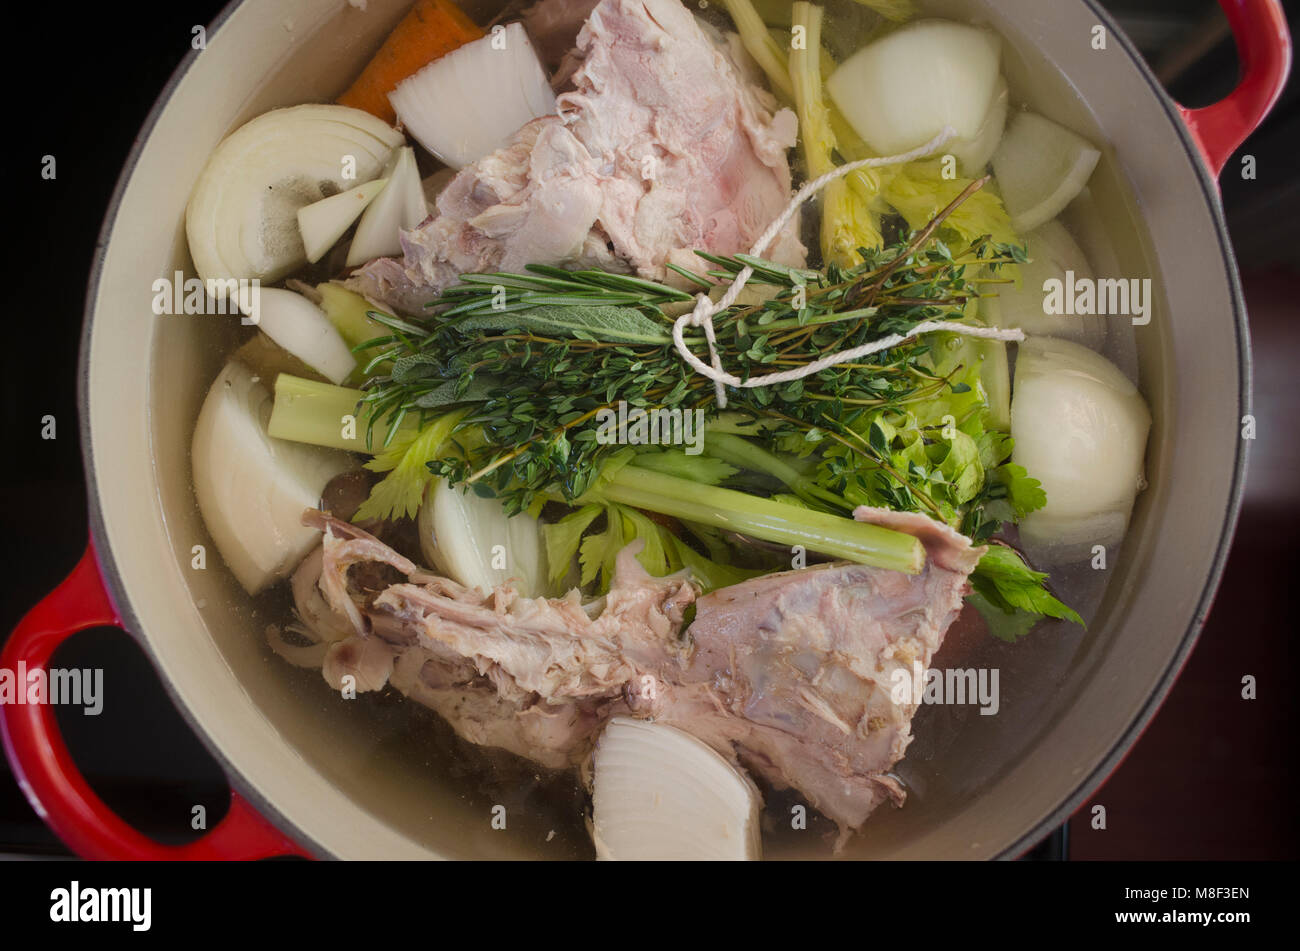 Cooking broth from turkey leftovers and vegetables Stock Photo